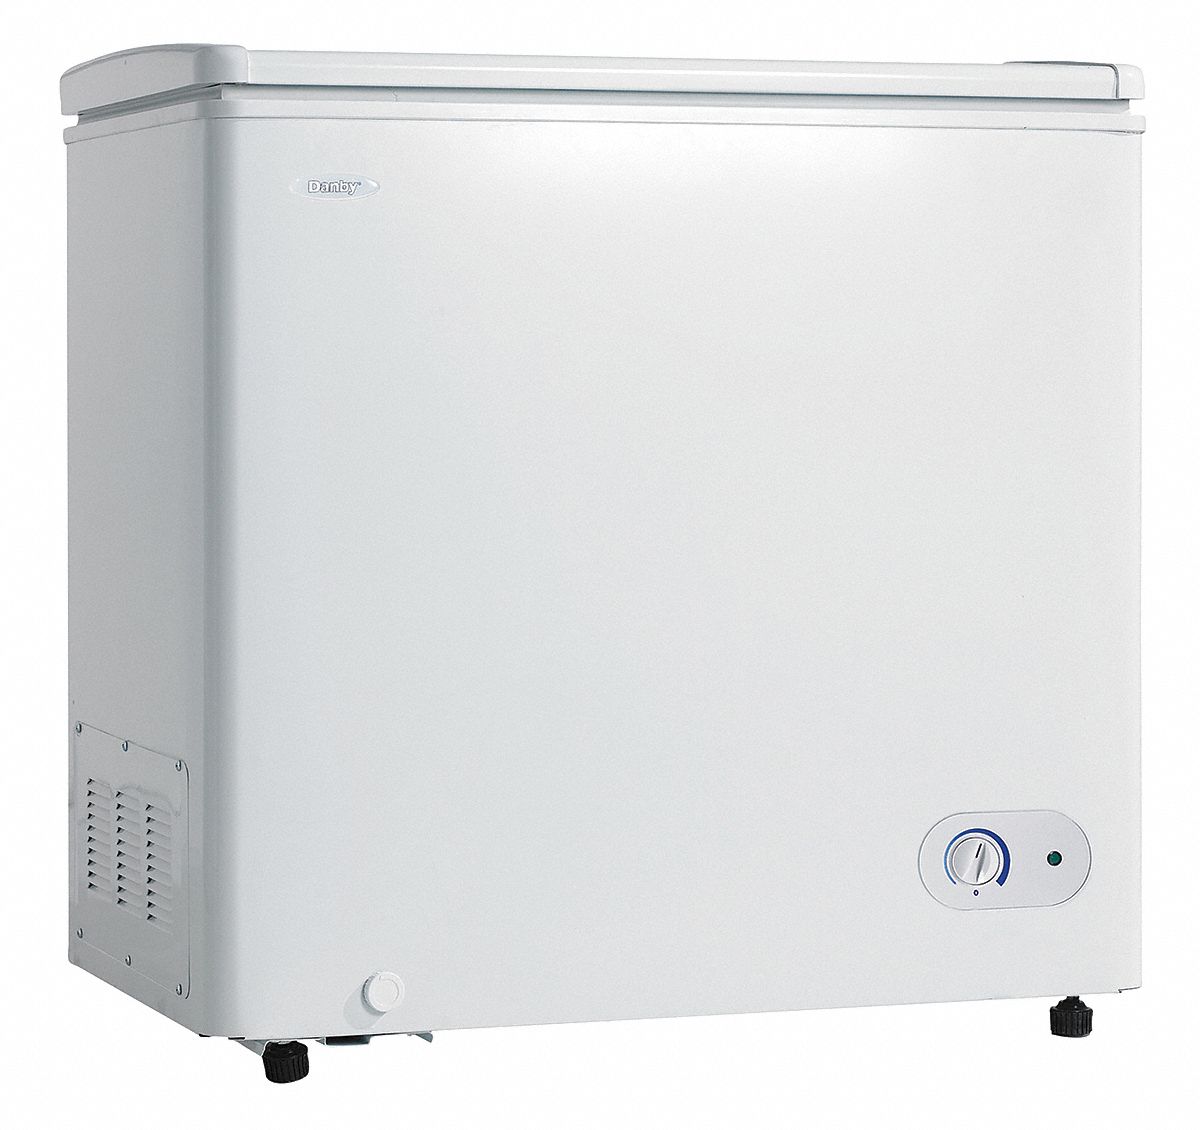 Freezer: 7.2 cu ft Freezer Capacity, 33 in Overall Ht, 39 7/8 in Overall Wd, White